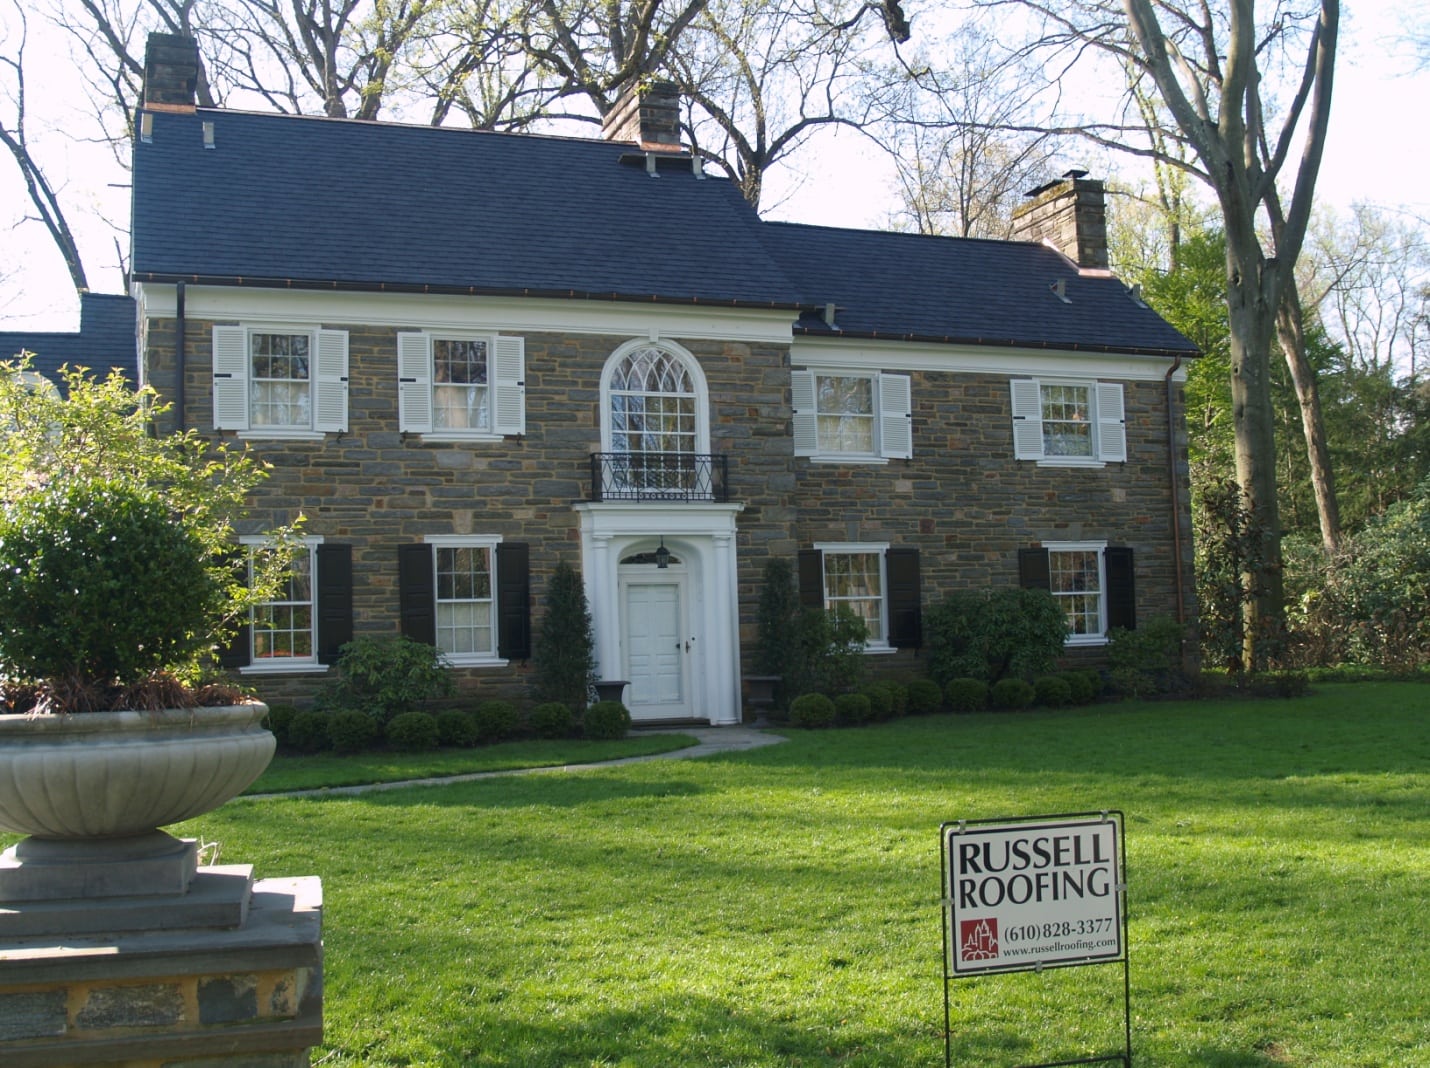 Russell Roofing - Oreland, PA, US, tile roof installation